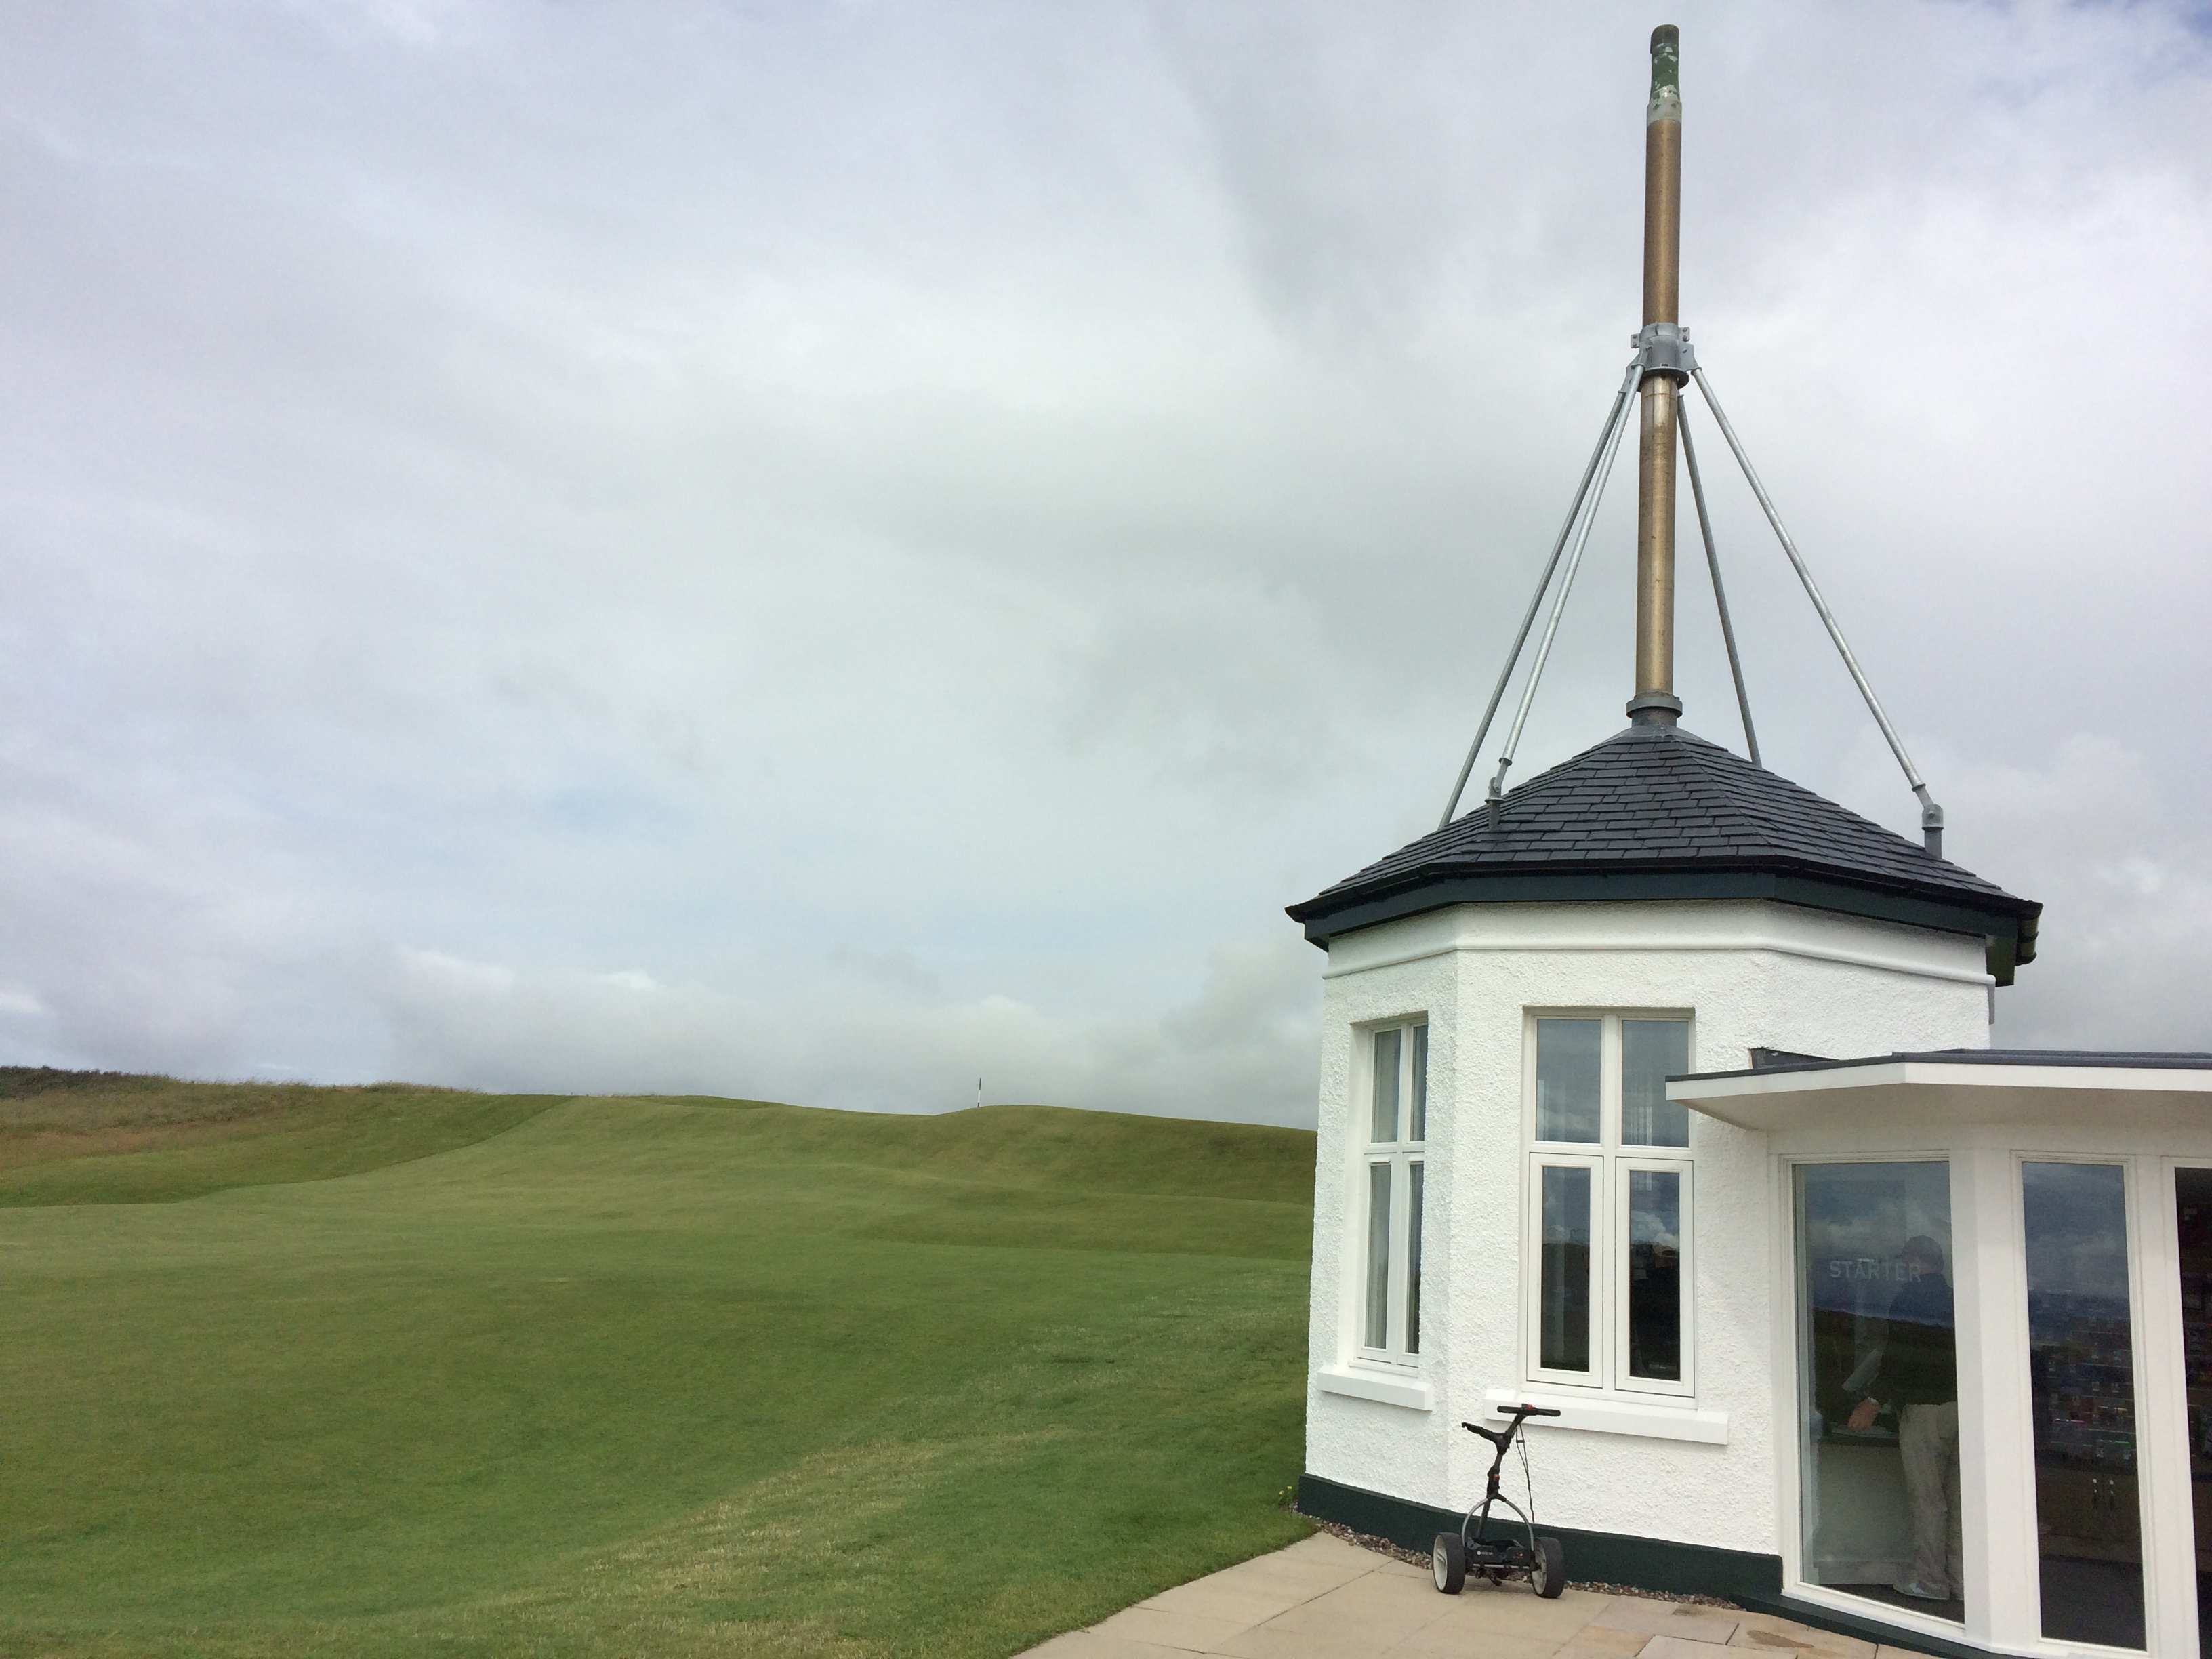 The periscope has been re-housed in in Elie's new starter's hut